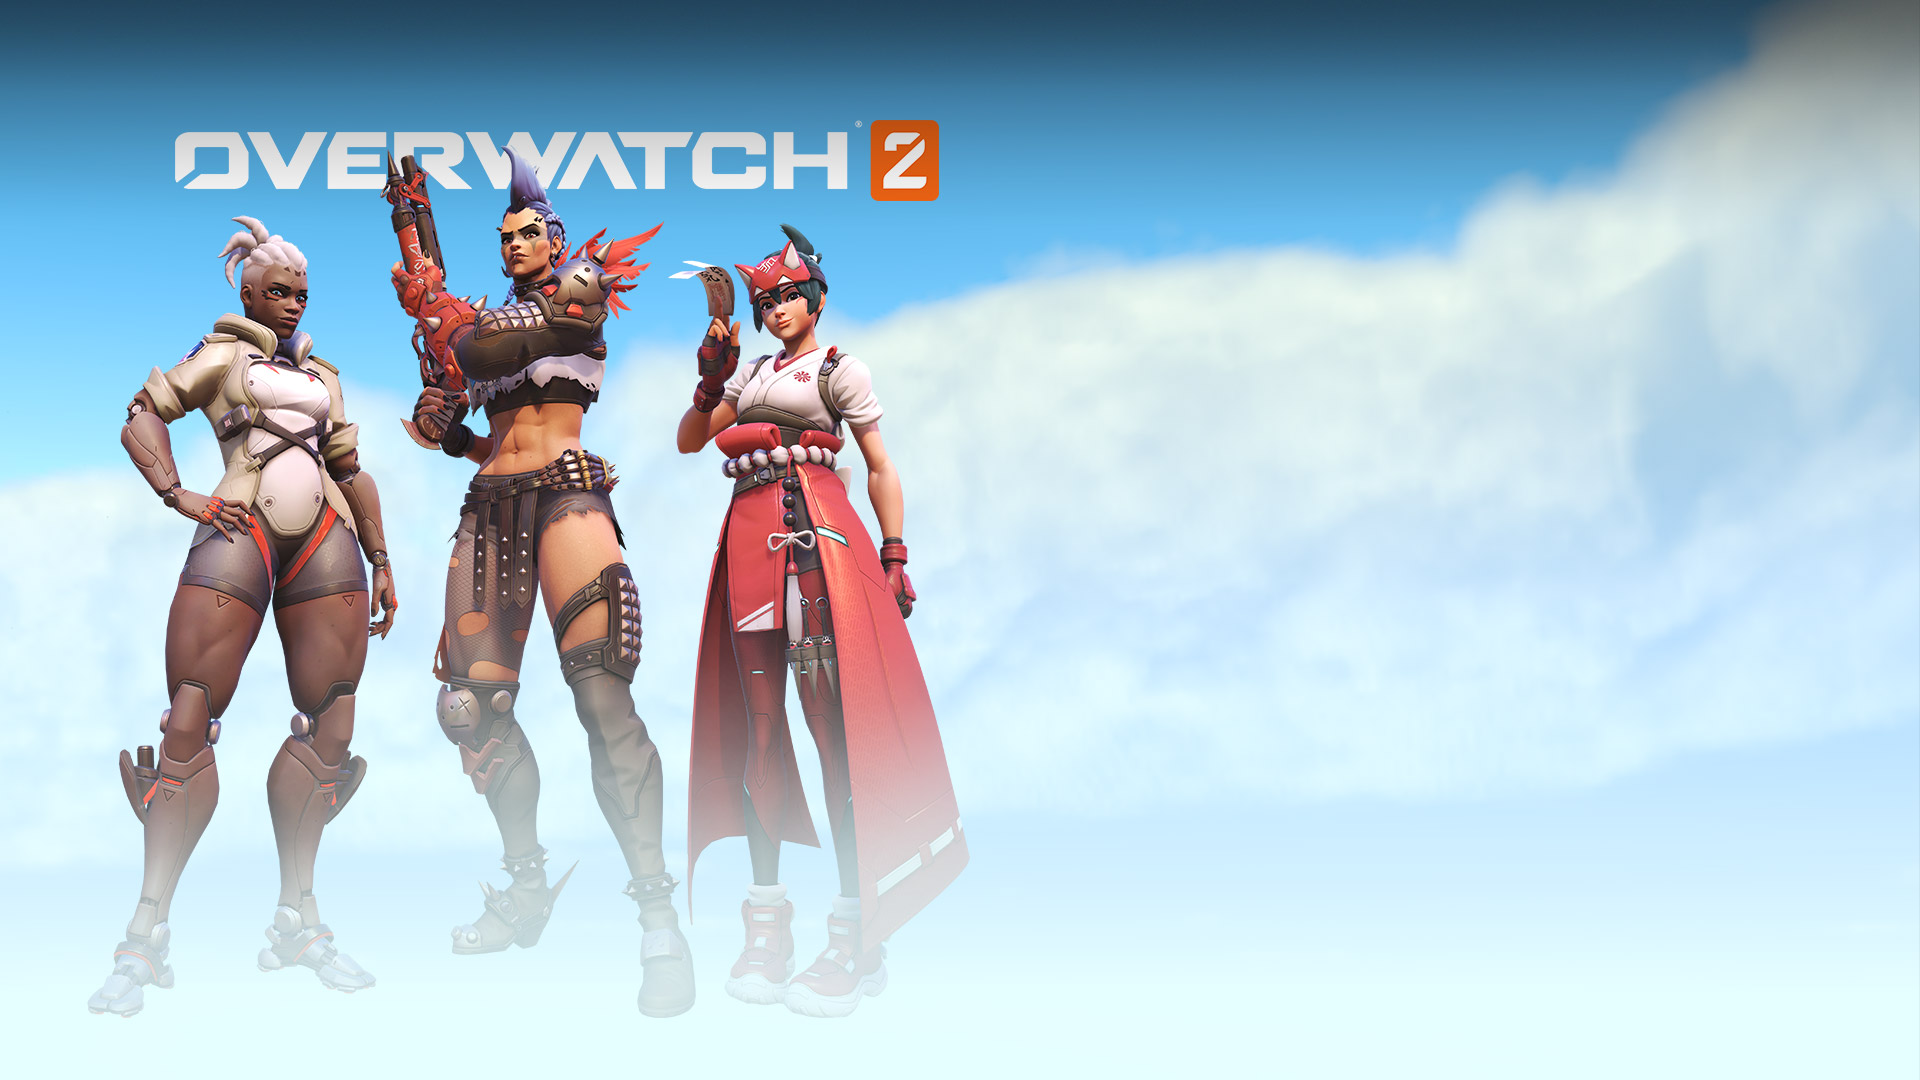 Overwatch 2, Sojourn, Junker Queen and Kiriko pose confidently among the clouds.